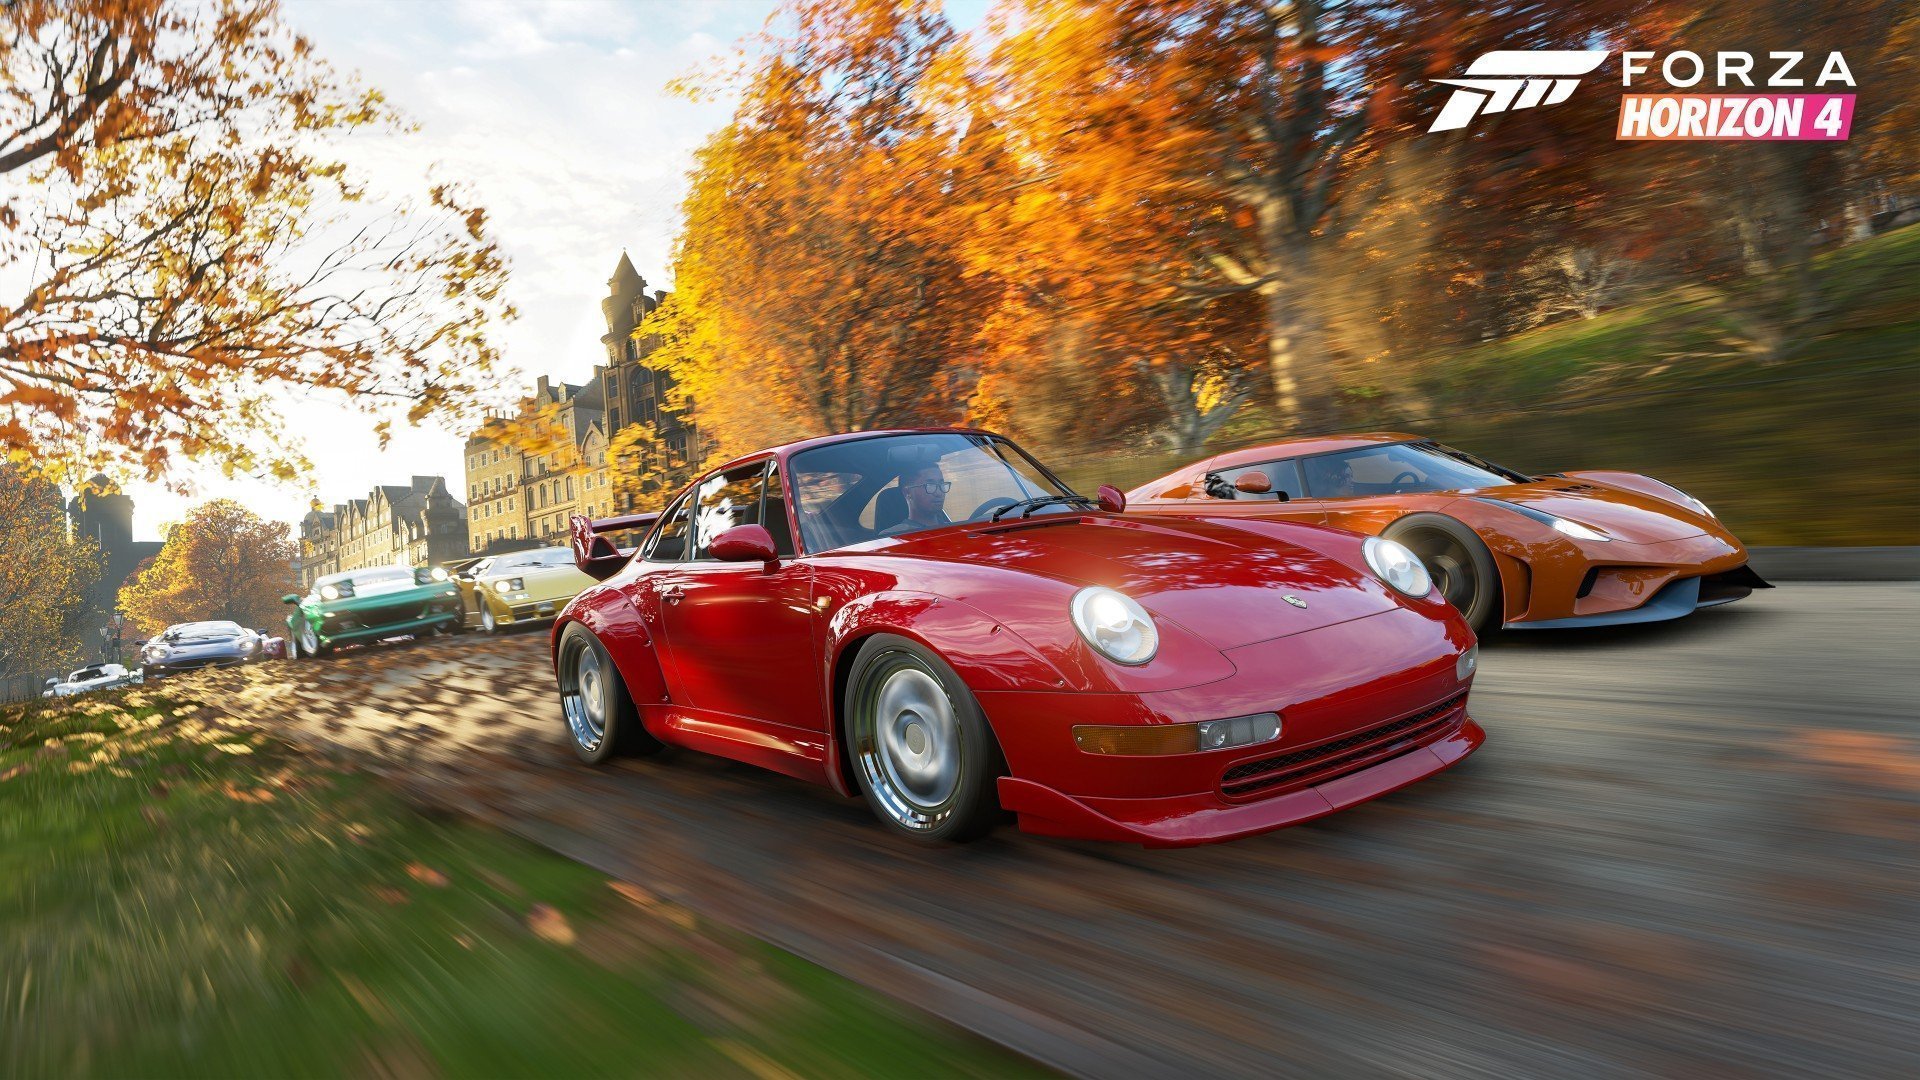 The ability to play online in Forza Horizon 4, bought at the Winds store Forza-Horizon-4_Autumn-Drive-1.jpg